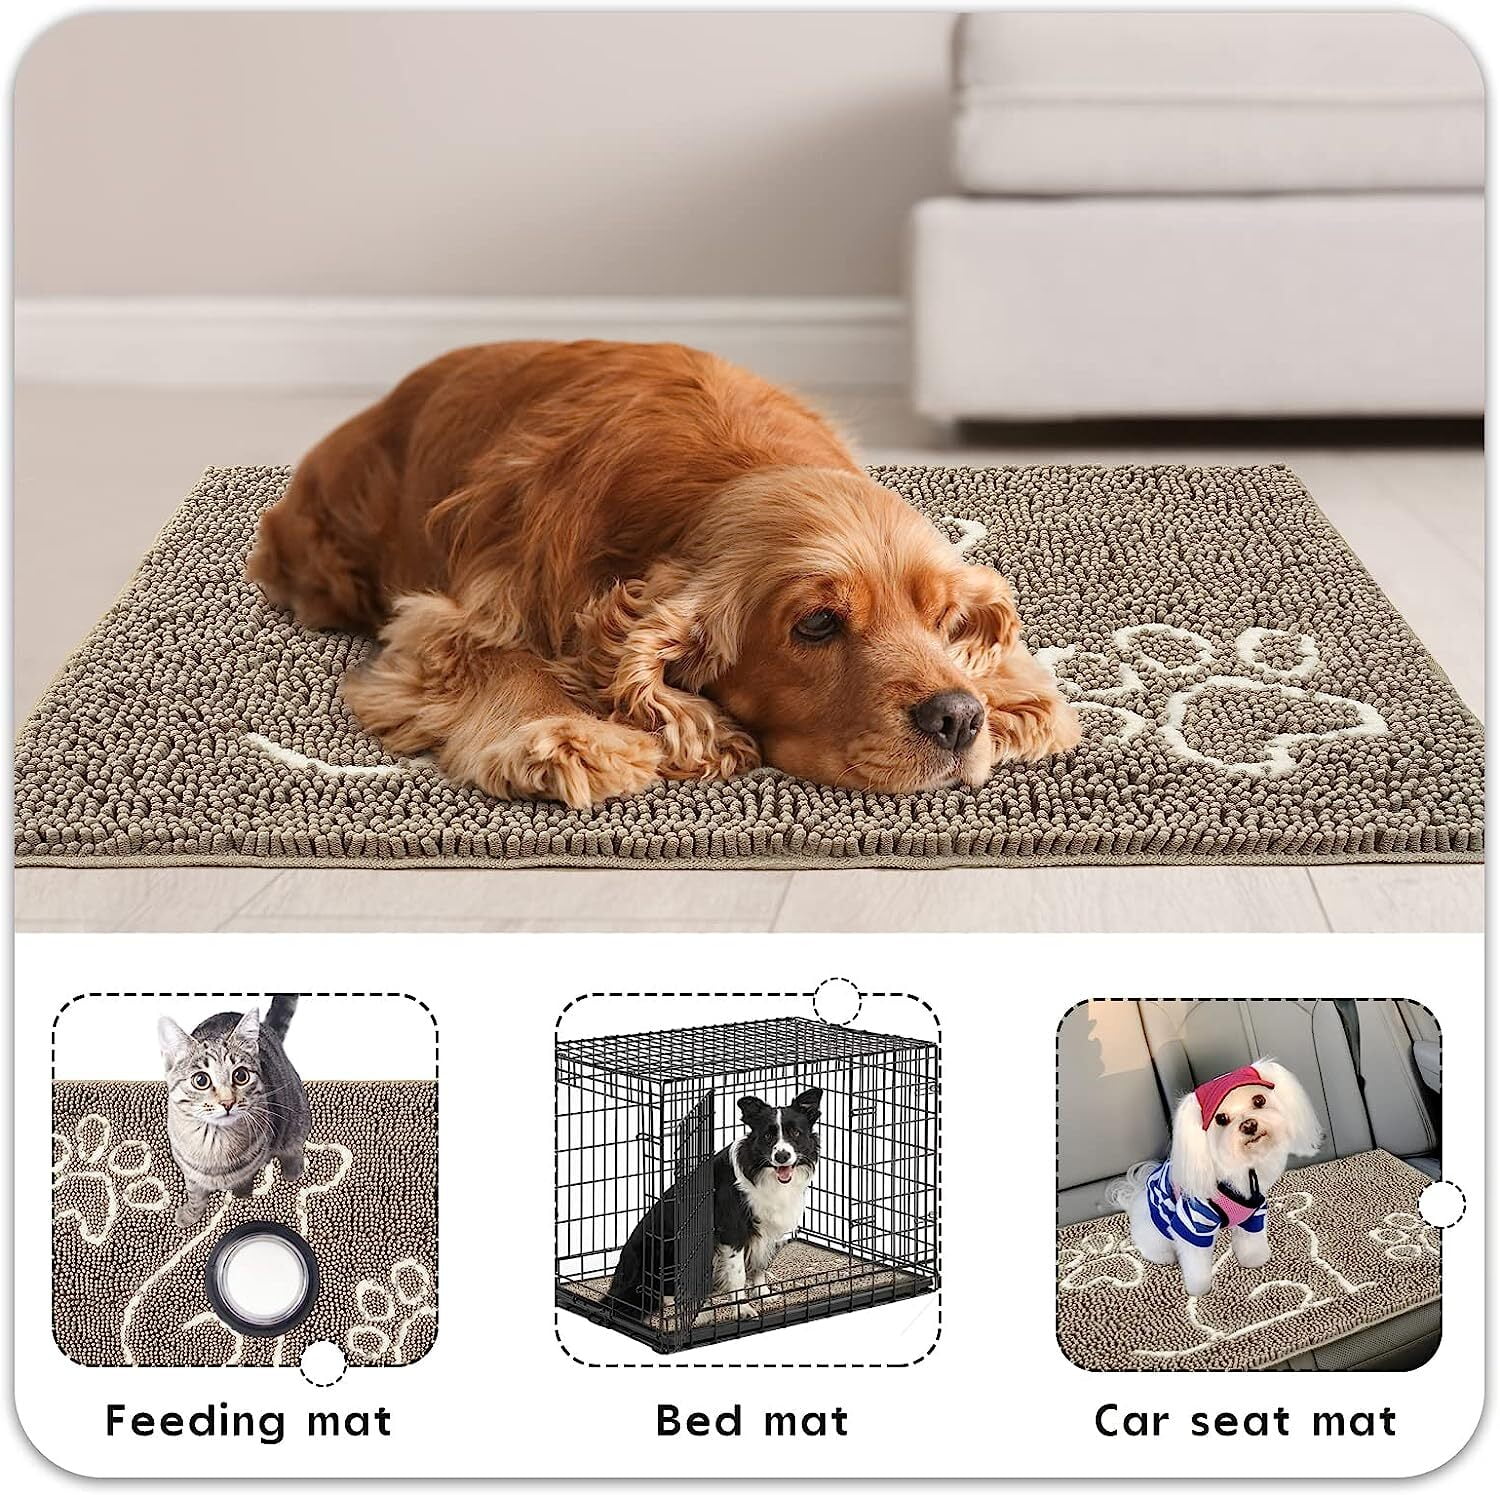 Mrdurns Super Absorbent Chenille Indoor Doormats, Muddy Paws Door Mats for  Dirty Dogs Rugs - Absorb Water Quick Dry Machine Washable - Pet Entryway